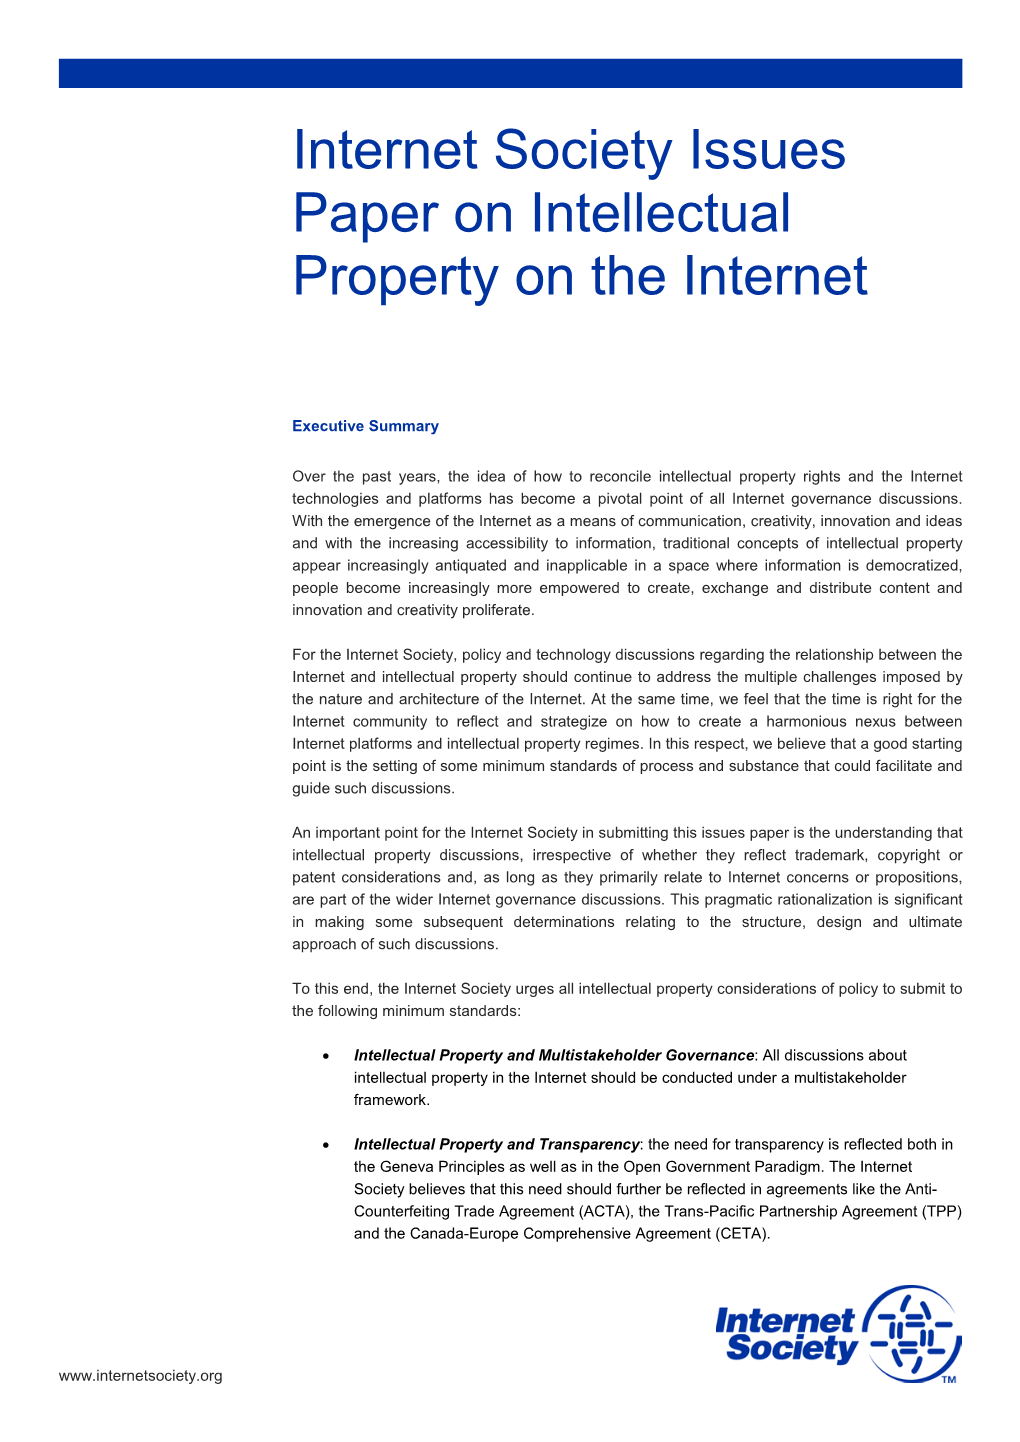 Paper on Intellectual Property on the Internet